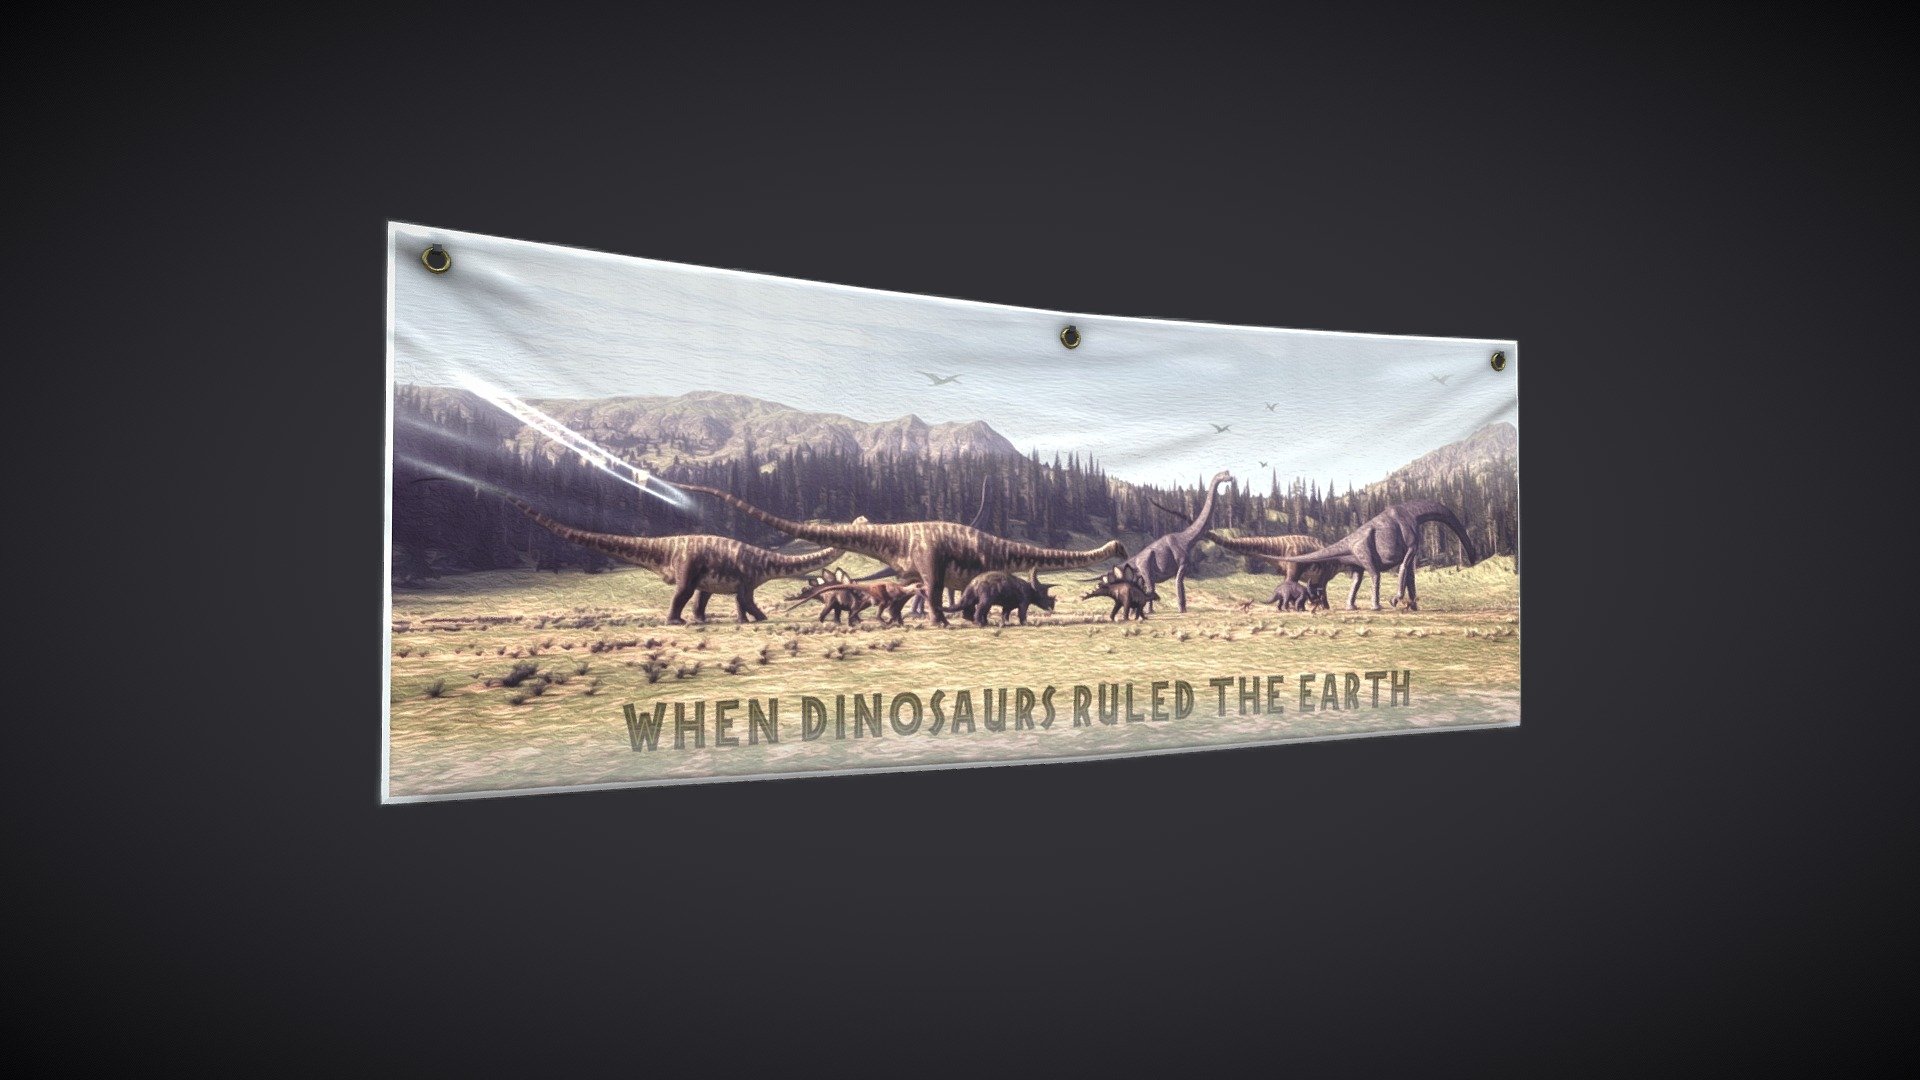 Museum Of Natural History - Asset Pack

* Dinosaur Banner



VR Ready

.............

OVA’s flagship software, StellarX, allows those with no programming or coding knowledge to place 3D goods and create immersive experiences through simple drag-and-drop actions. 

Storytelling, which involves a series of interactions, sequences, and triggers are easily created through OVA’s patent-pending visual scripting tool. 

.............

**Download StellarX on the Meta Quest Store: oculus.com/experiences/quest/8132958546745663
**

**Download StellarX on Steam: store.steampowered.com/app/1214640/StellarX
**

Have a bigger immersive project in mind? Get in touch with us! 



StellarX on LinkedIn: linkedin.com/showcase/stellarx-by-ova

Join the StellarX Discord server! 

........

StellarX© 2024 - Museum Of Natural History | Dinosaur Banner - Buy Royalty Free 3D model by StellarX 3d model